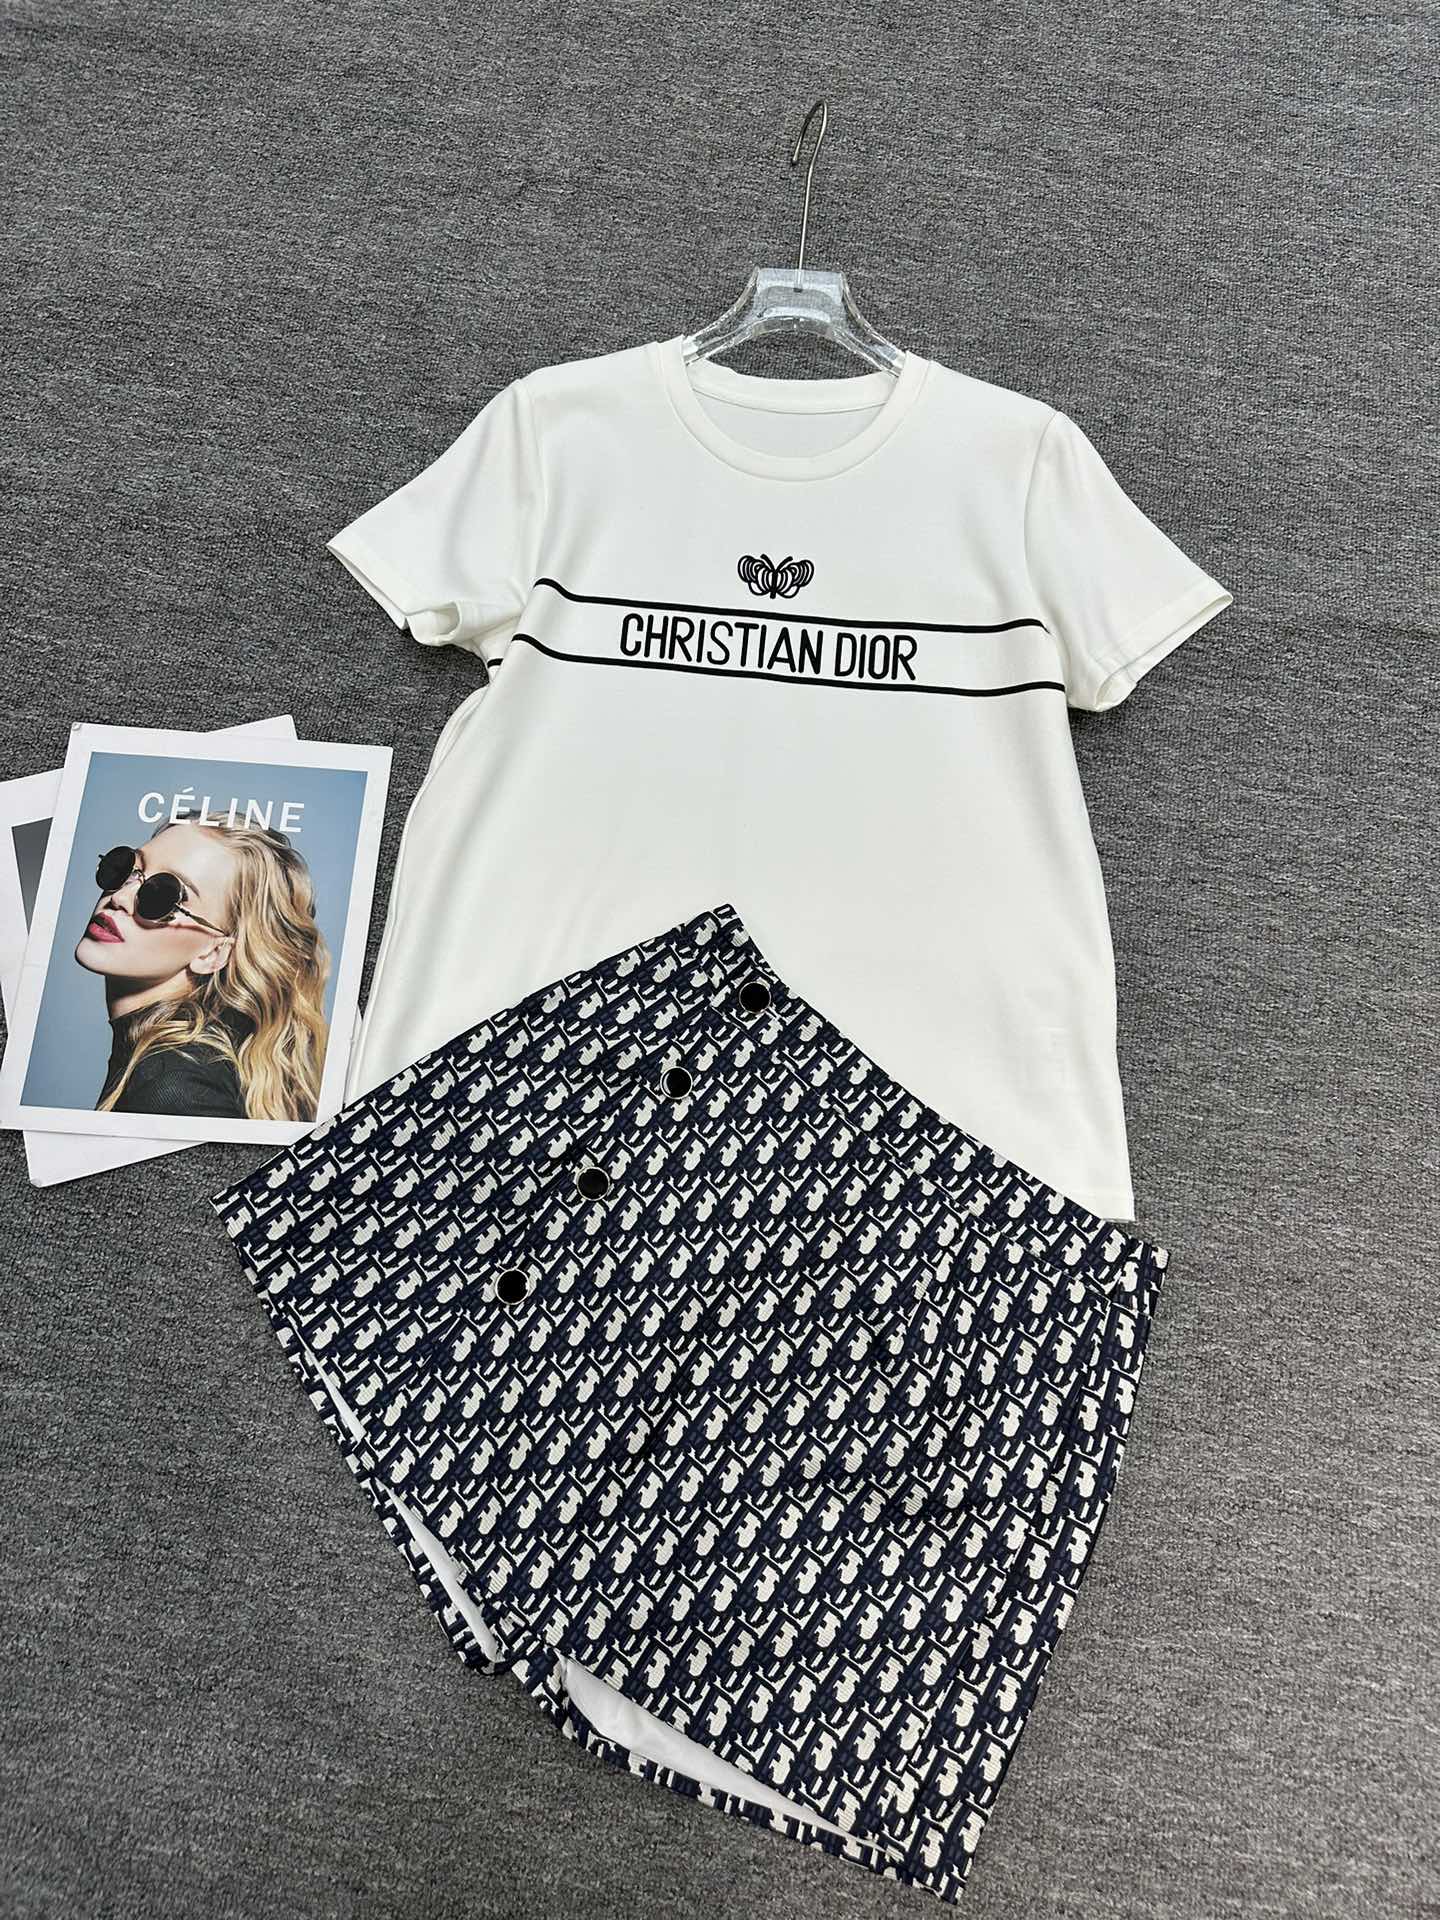 Dior Clothing T-Shirt Summer Collection Short Sleeve